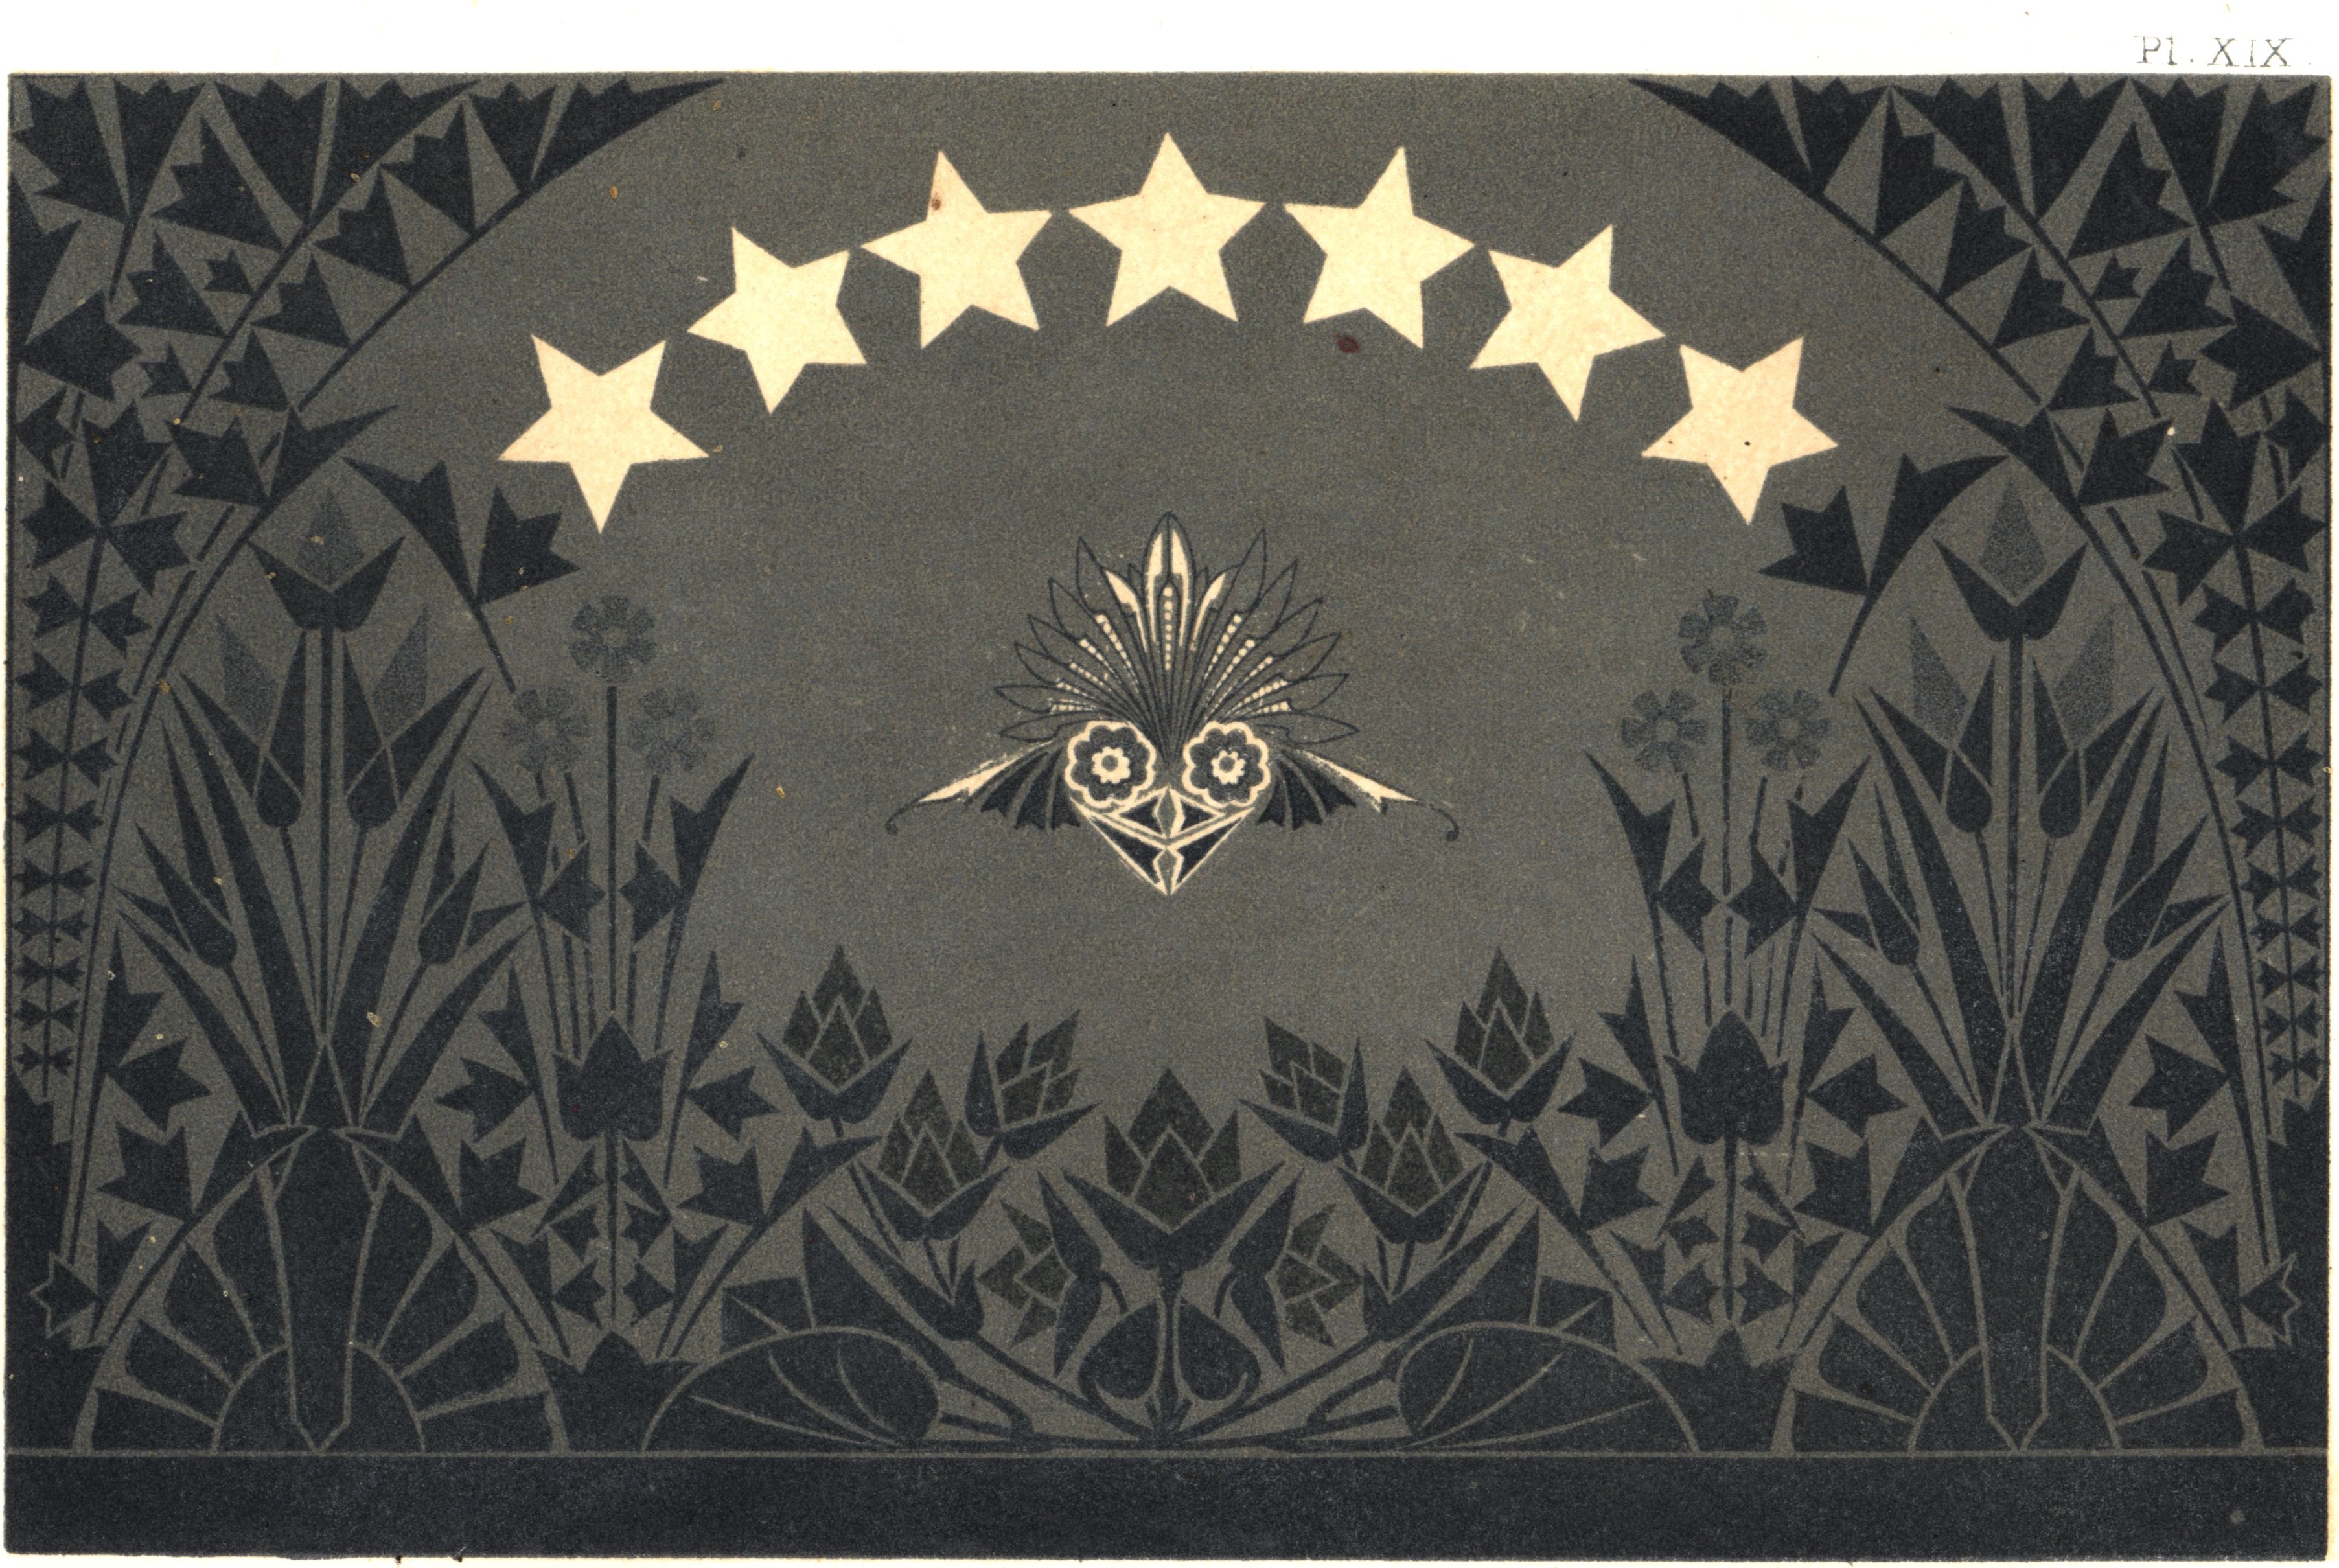 Figure 13. Dresser, “Evening” wallpaper pattern. Plate XVI from _The Art of Decorative Design_. Courtesy of the Department of Special Collections, Stanford University Libraries.